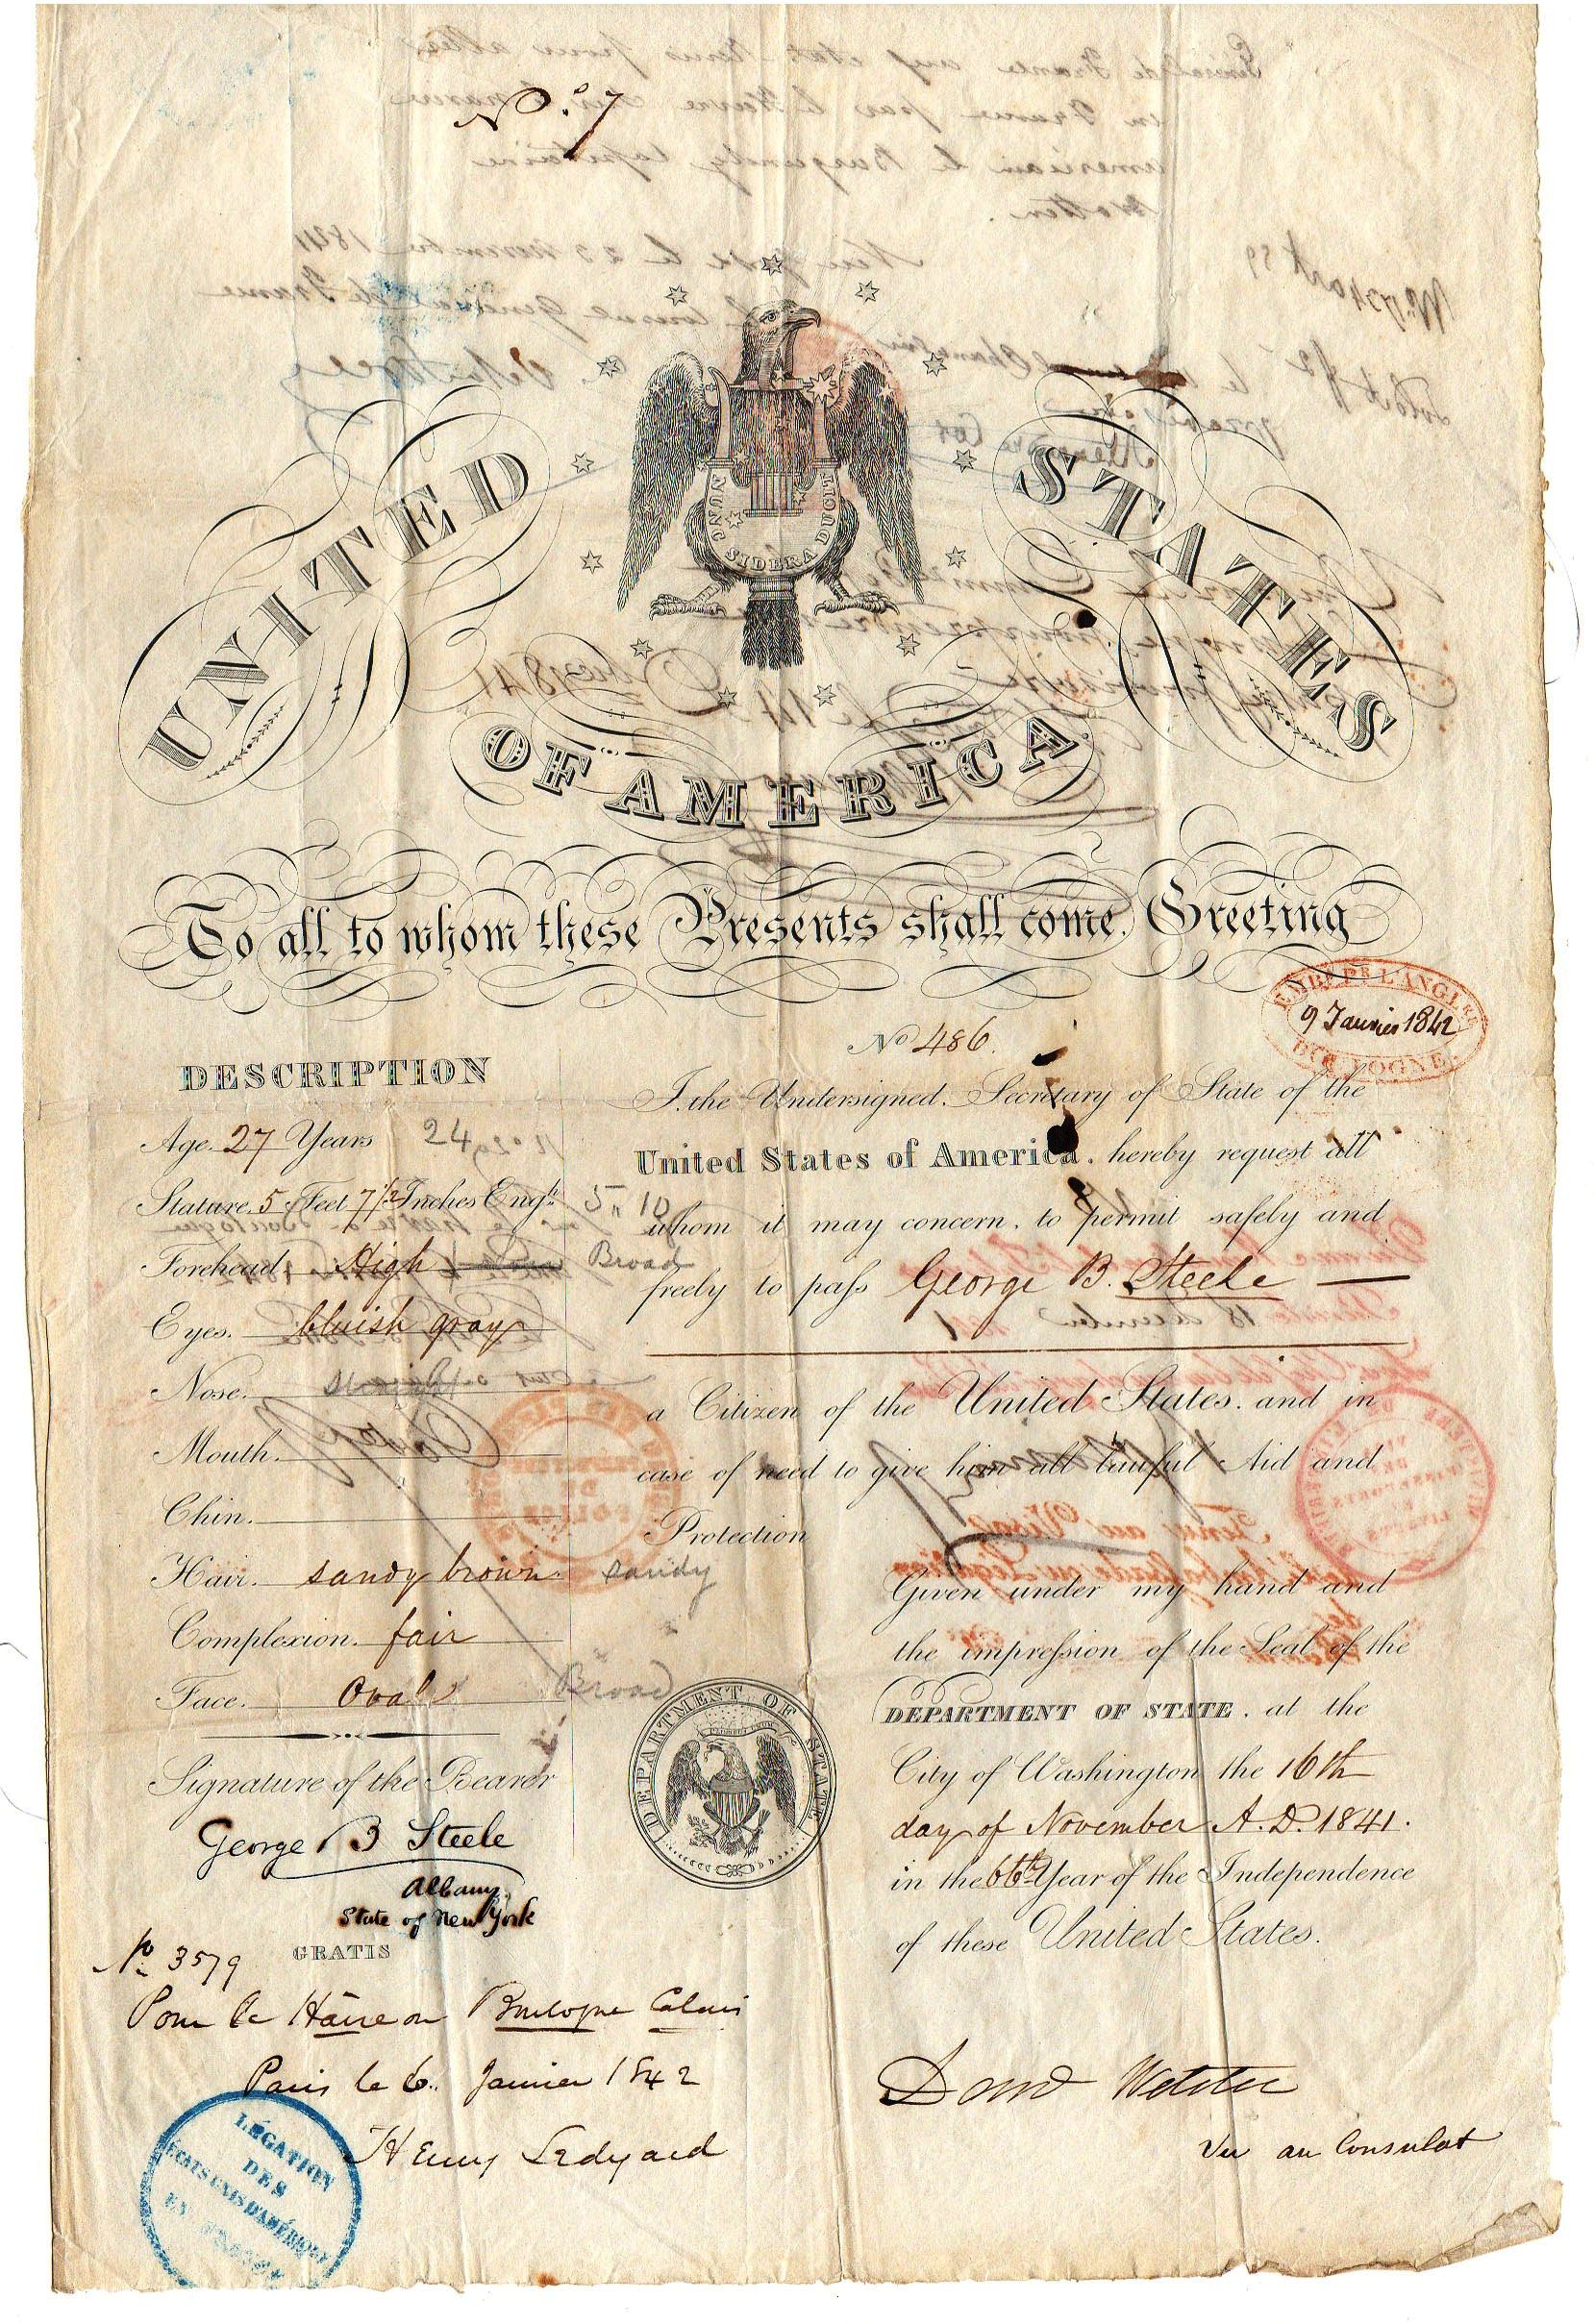 This American travel document from 1841 describes its bearer as having a straight nose, fair complexion, and oval chin.